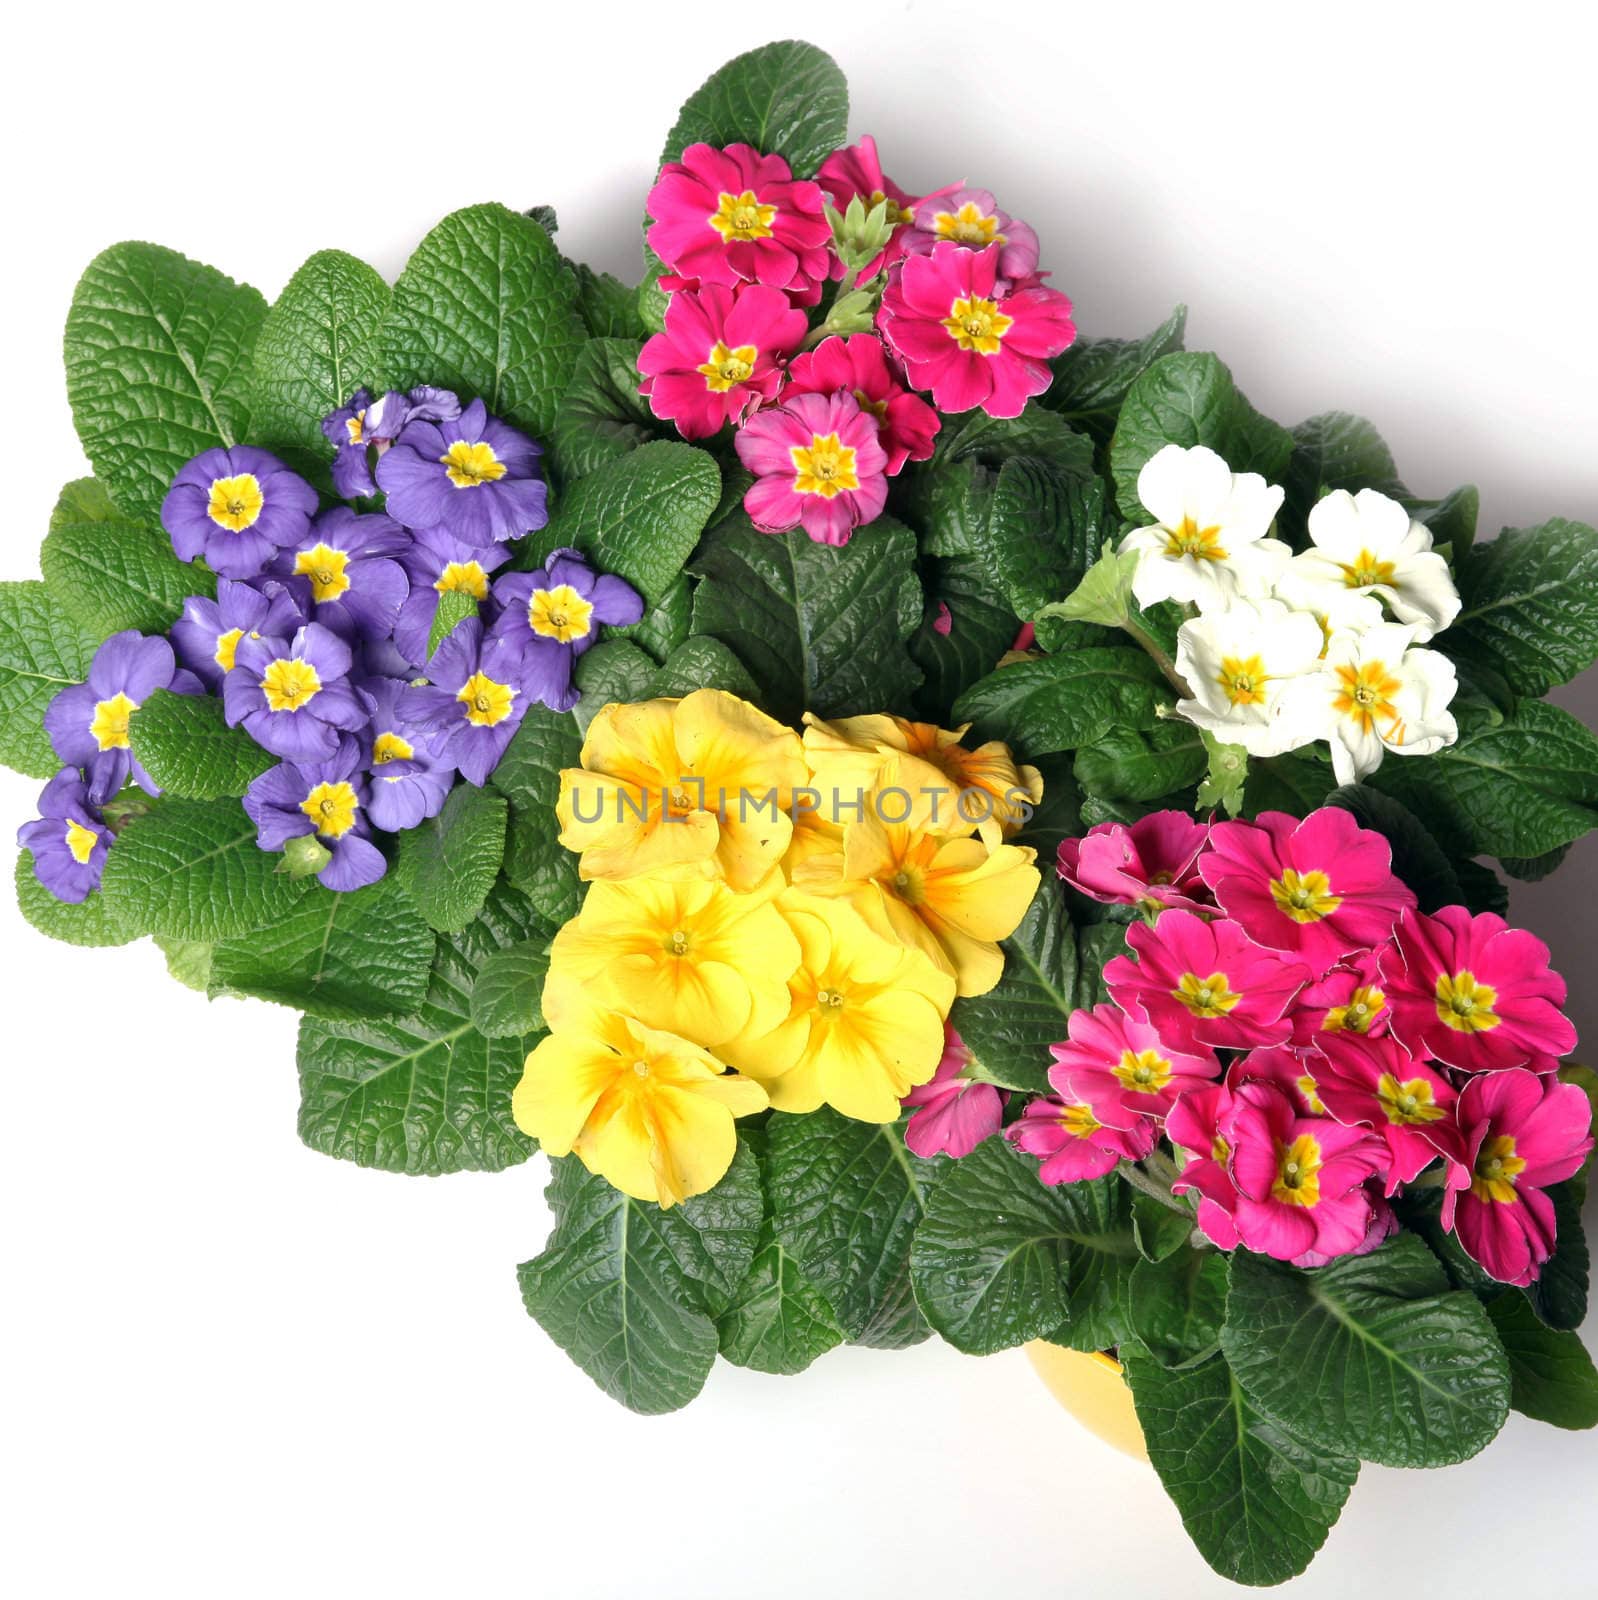 Colorful primroses from the top - square - on a white background